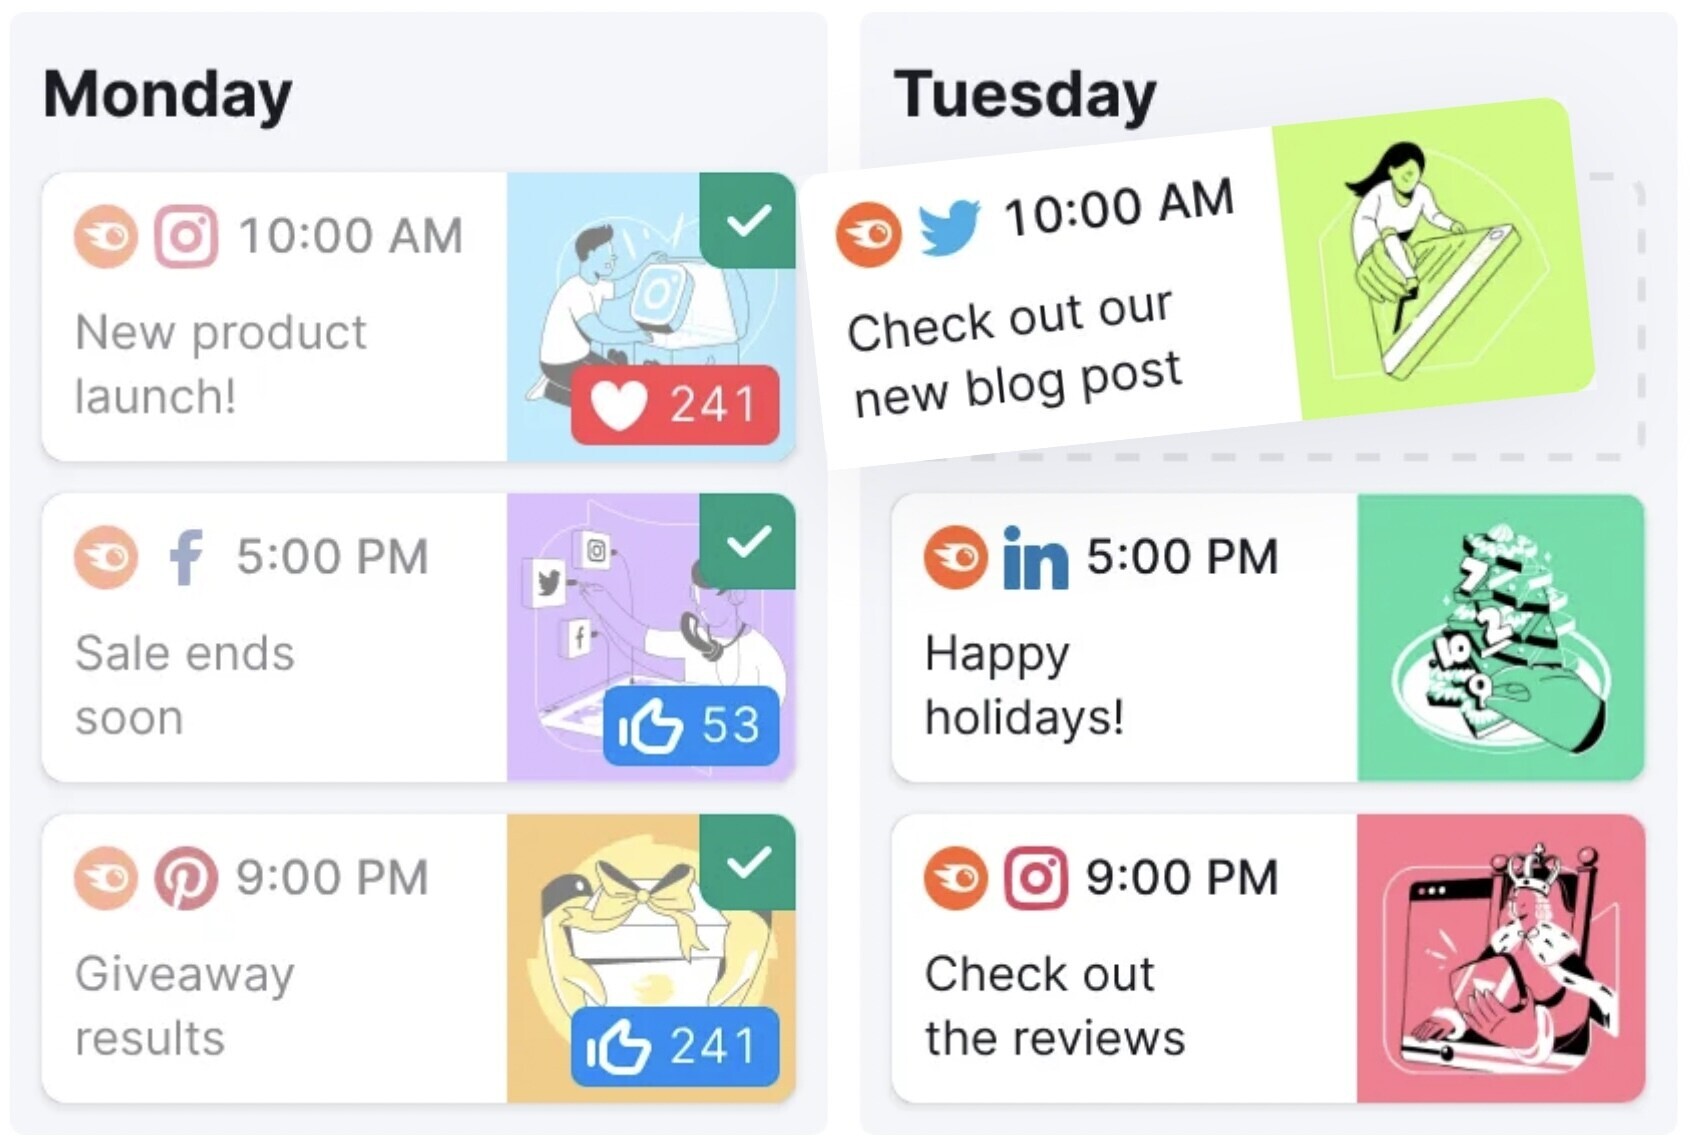 Social media marketers post regularly across platforms every day. Tools like Semrush schedule and track all this content